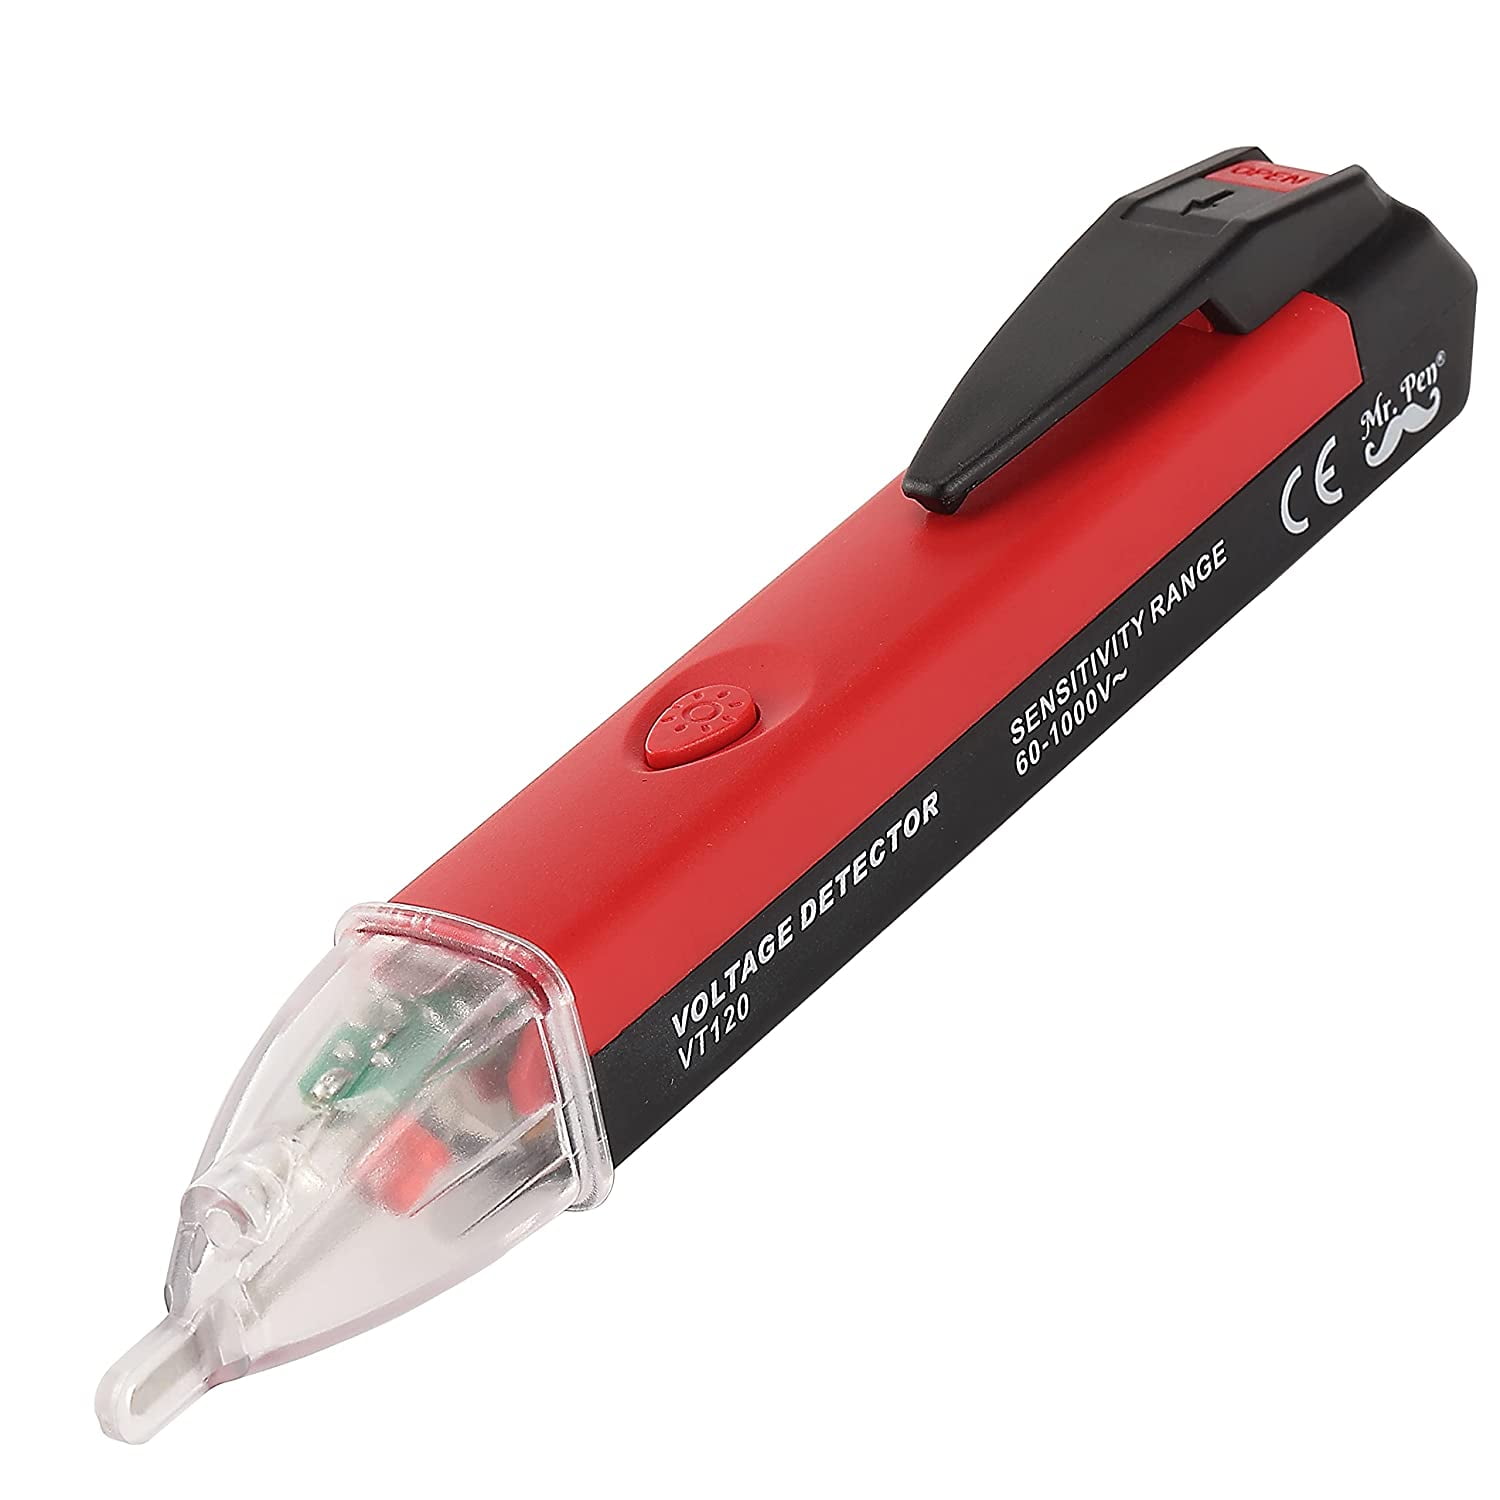 Tacklife VT02 Non-Contact Voltage Tester with Adjustable Sensitivity for sale online 